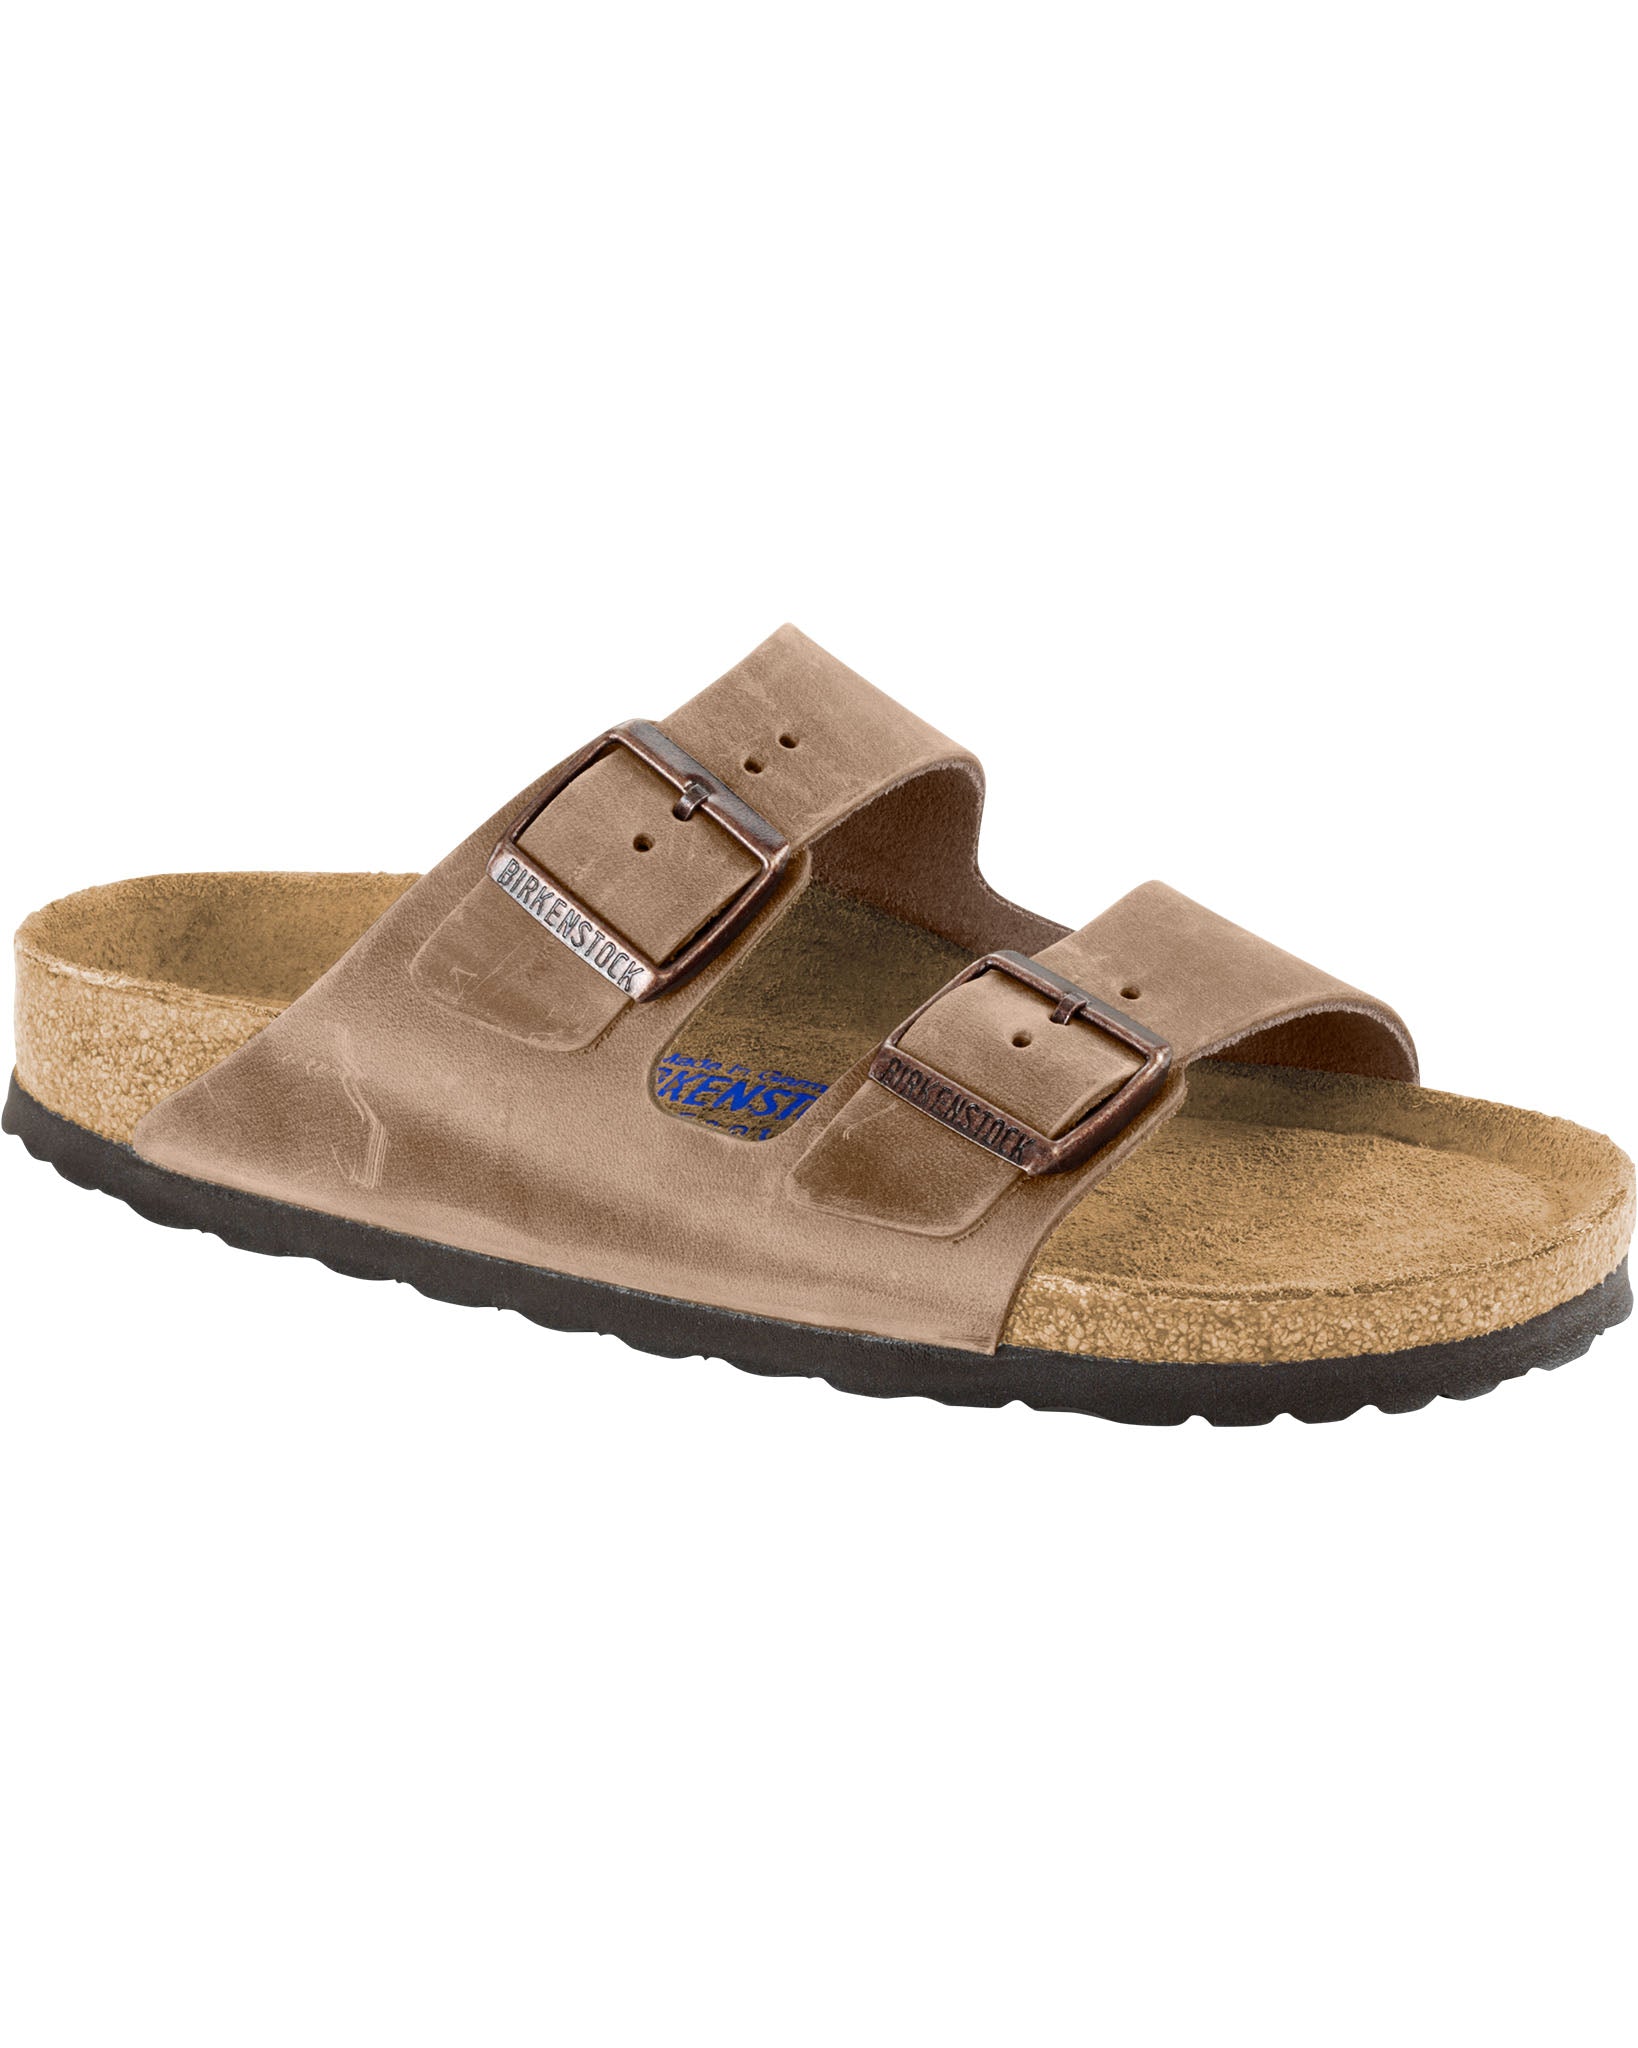 Arizona Soft Footbed Tabacco Oiled Leather Sandals